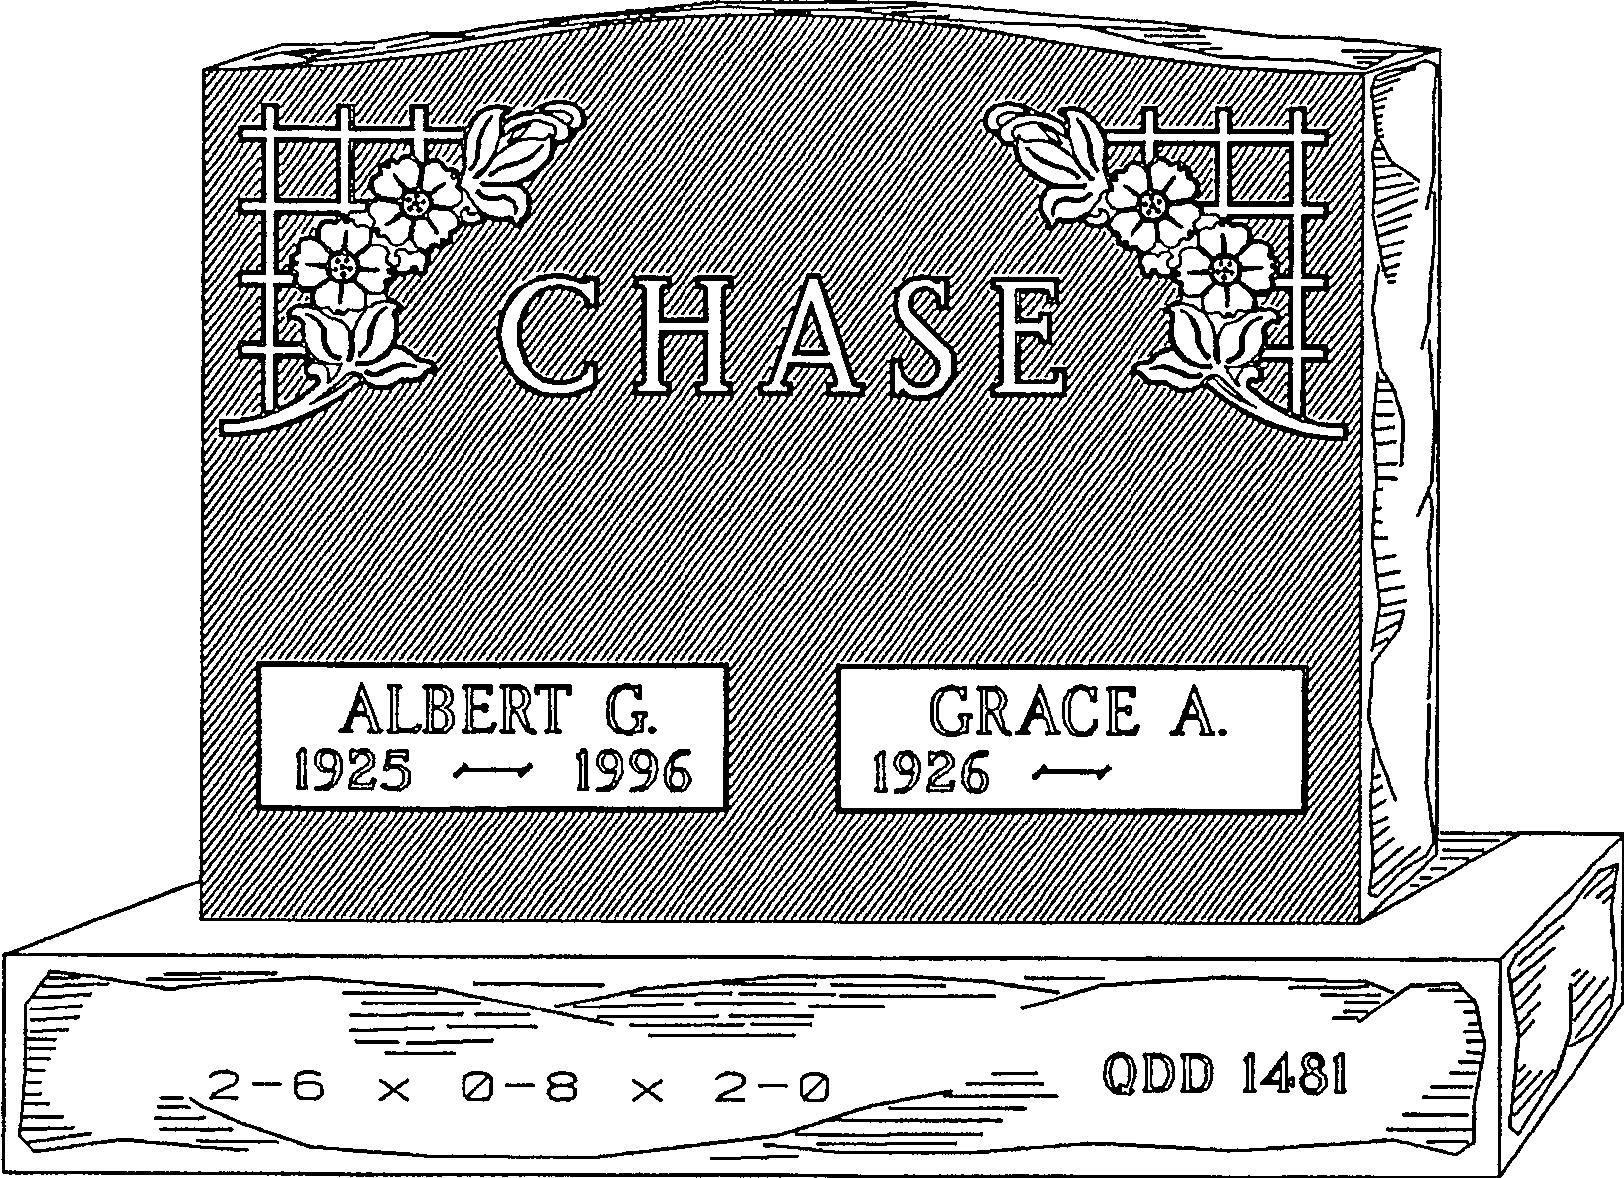 a black and white drawing of a gravestone for albert g. and grace a.